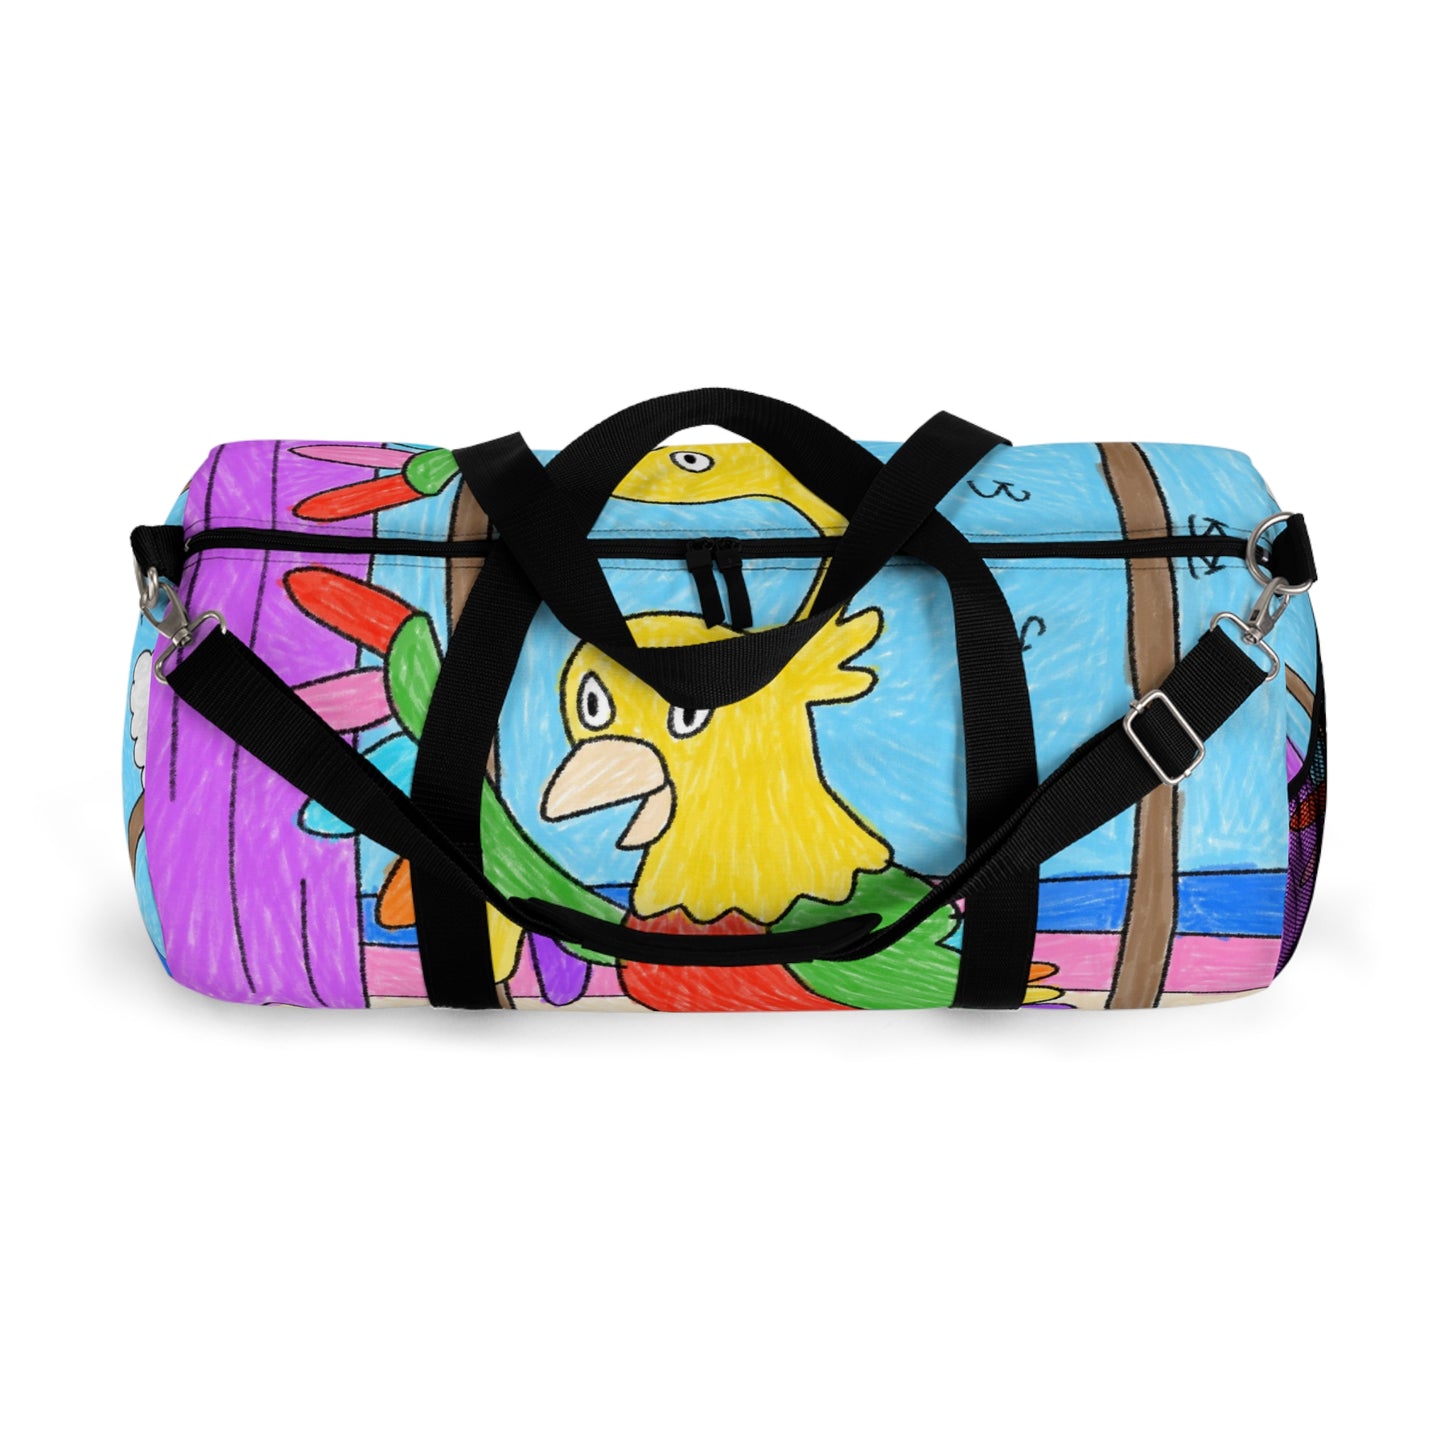 Animal Lover Parrot Perfect Gift for Parrot Owners Duffel Bag